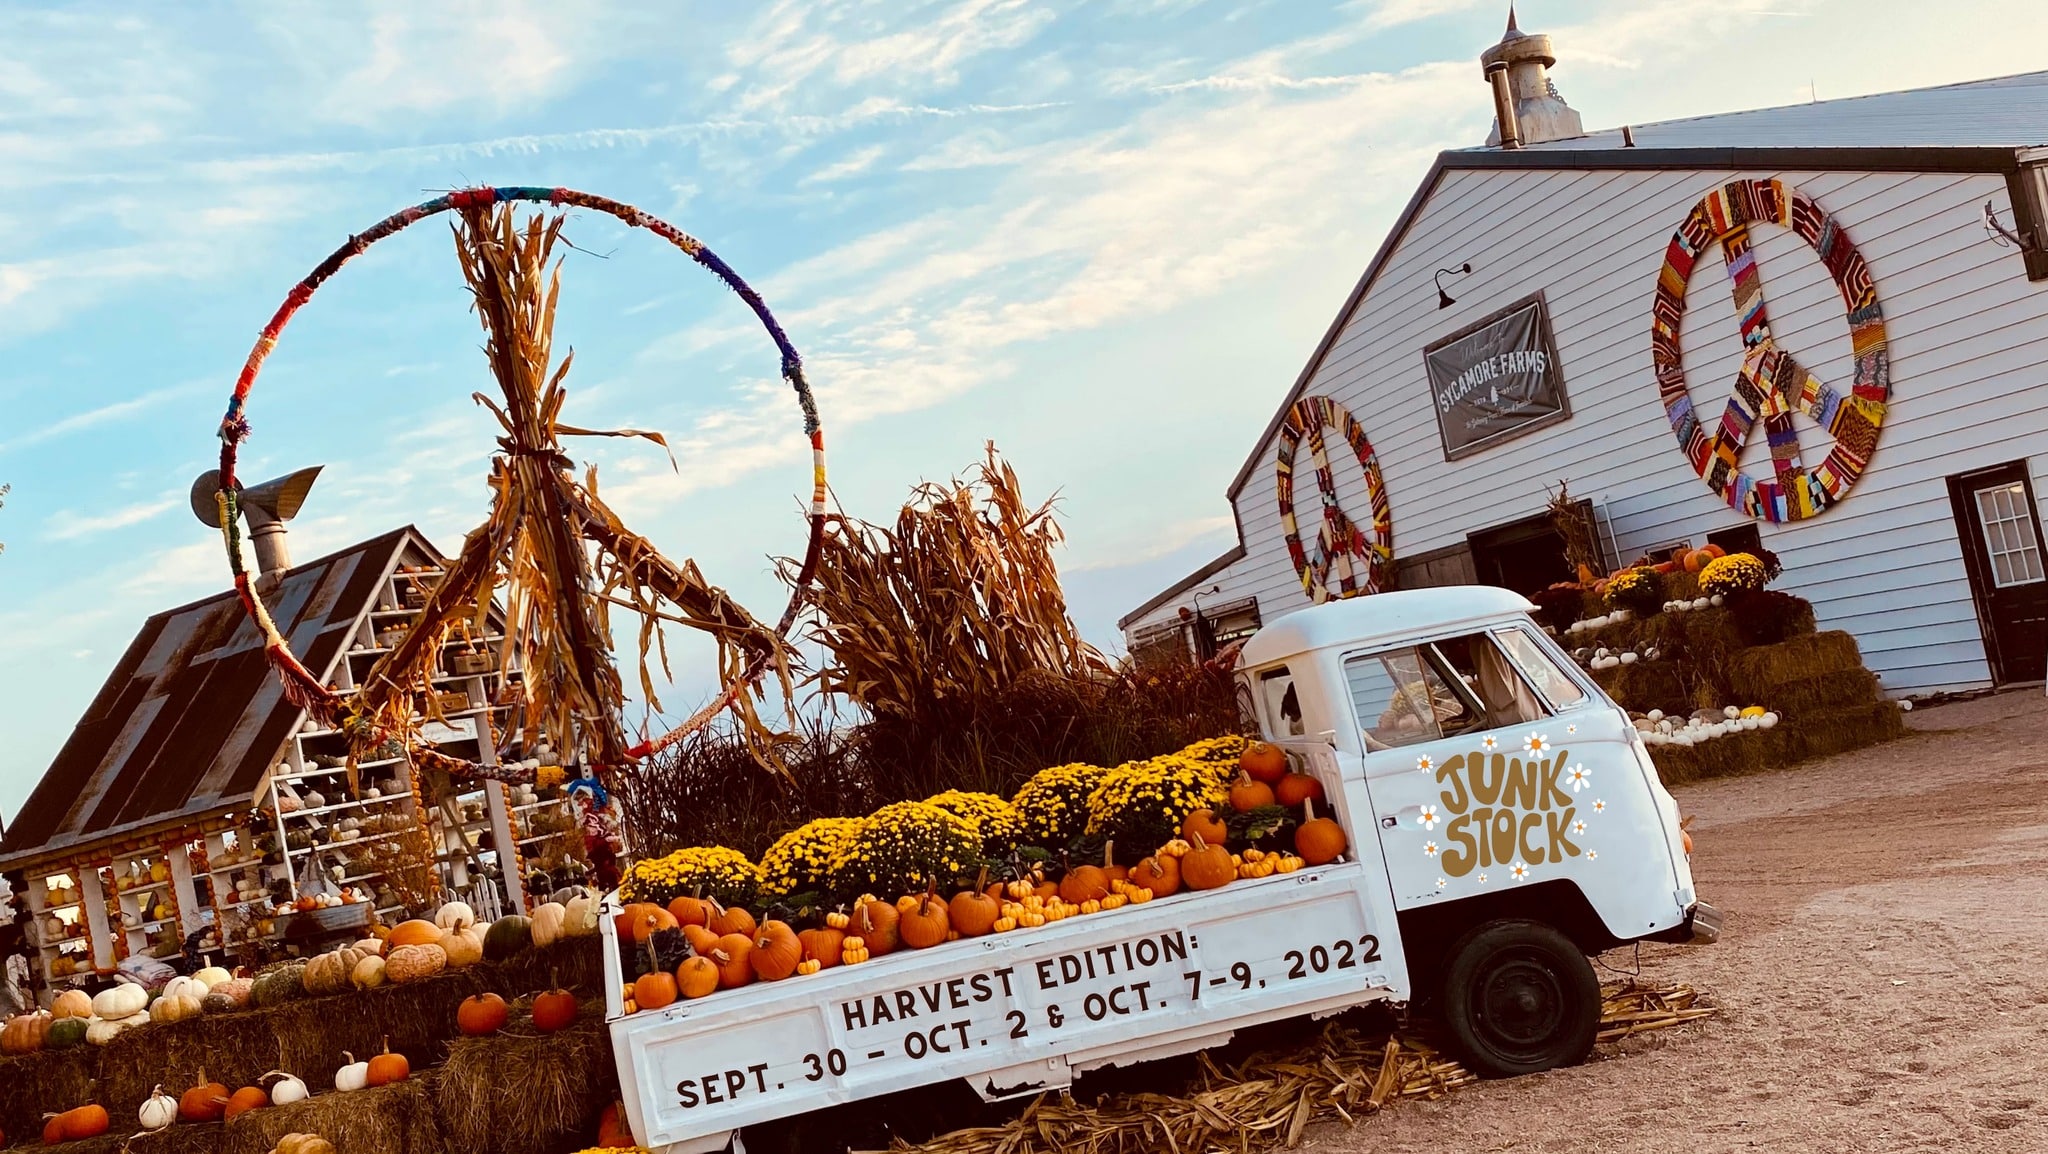 Sycamore Farms barn and pumpkin structure in the background with retro truck full of pumpkins in the foreground. 